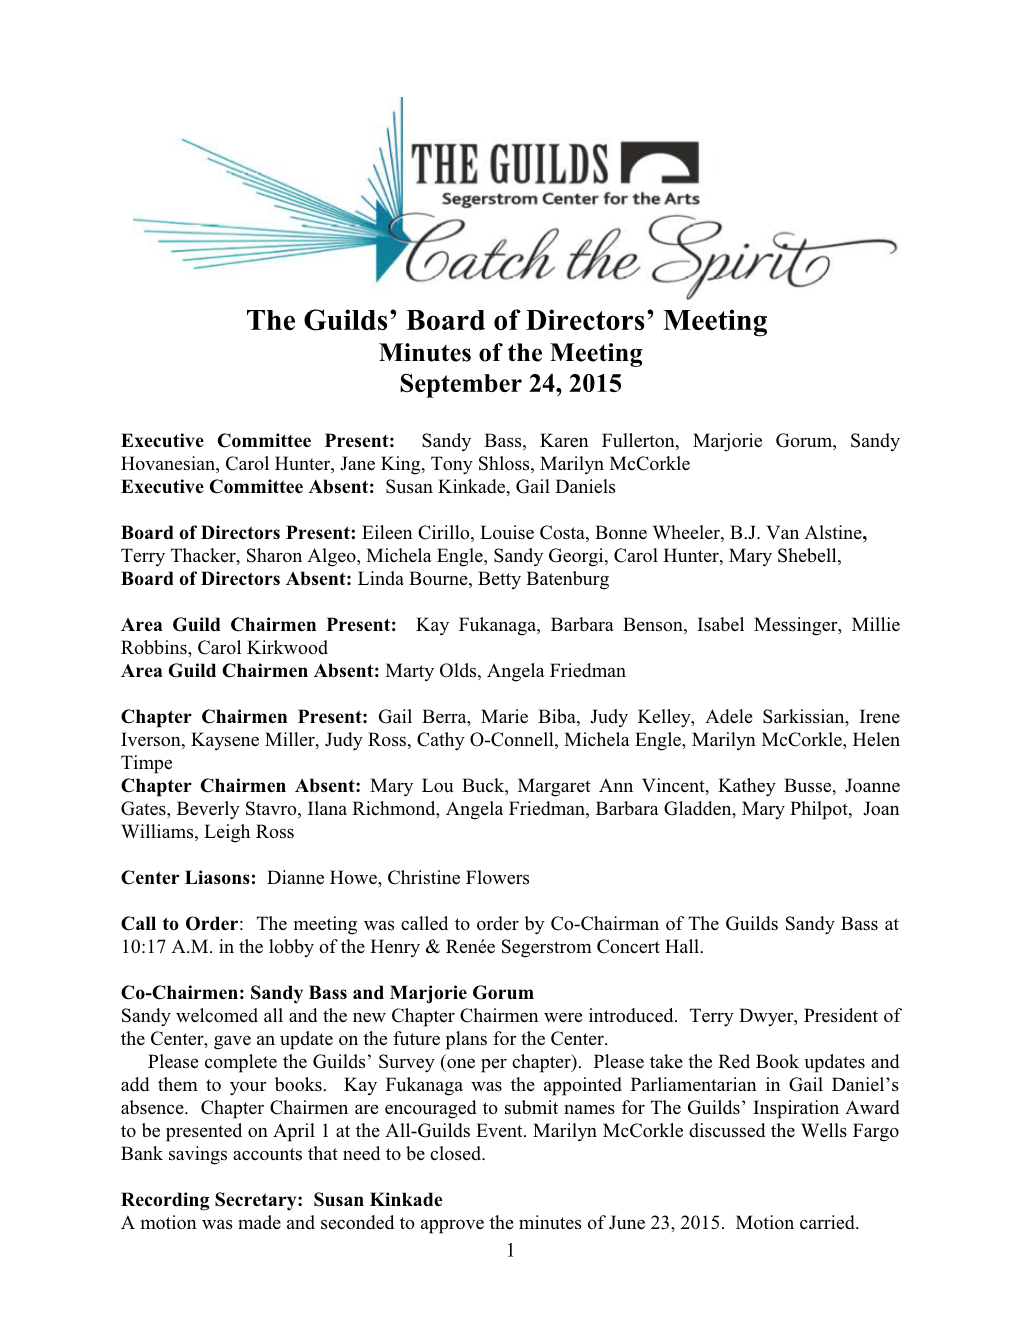 The Guilds Executive Committee